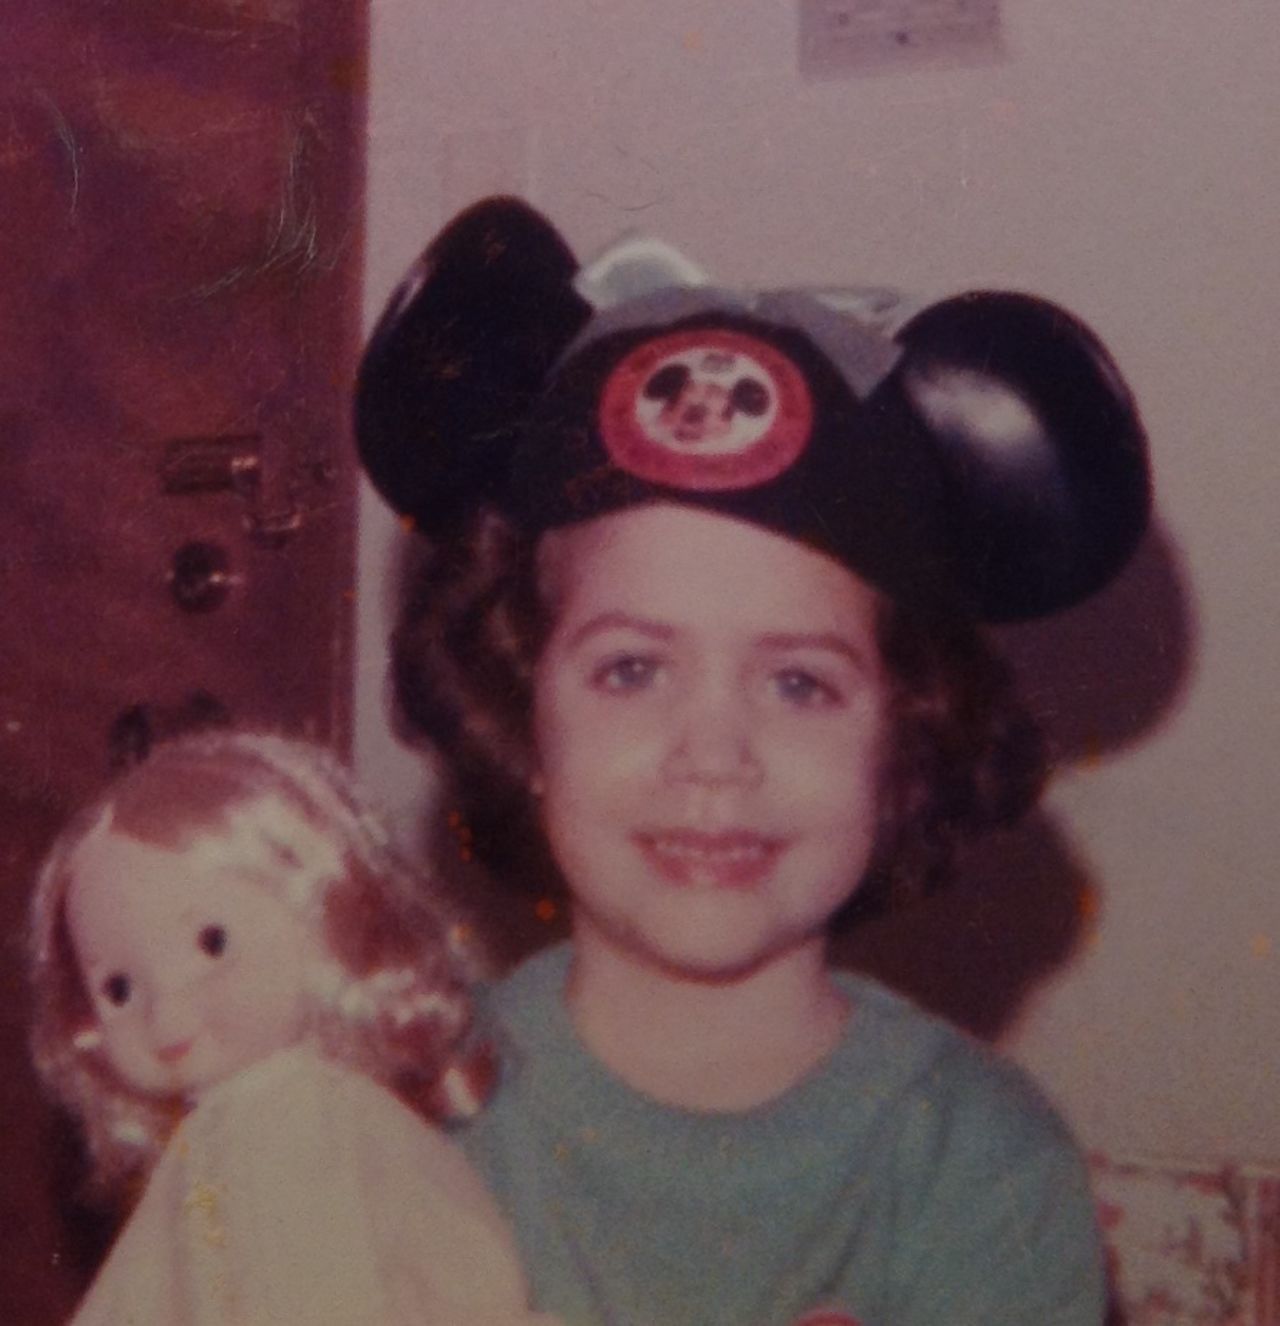 Disney's mouse ears a rite of passage